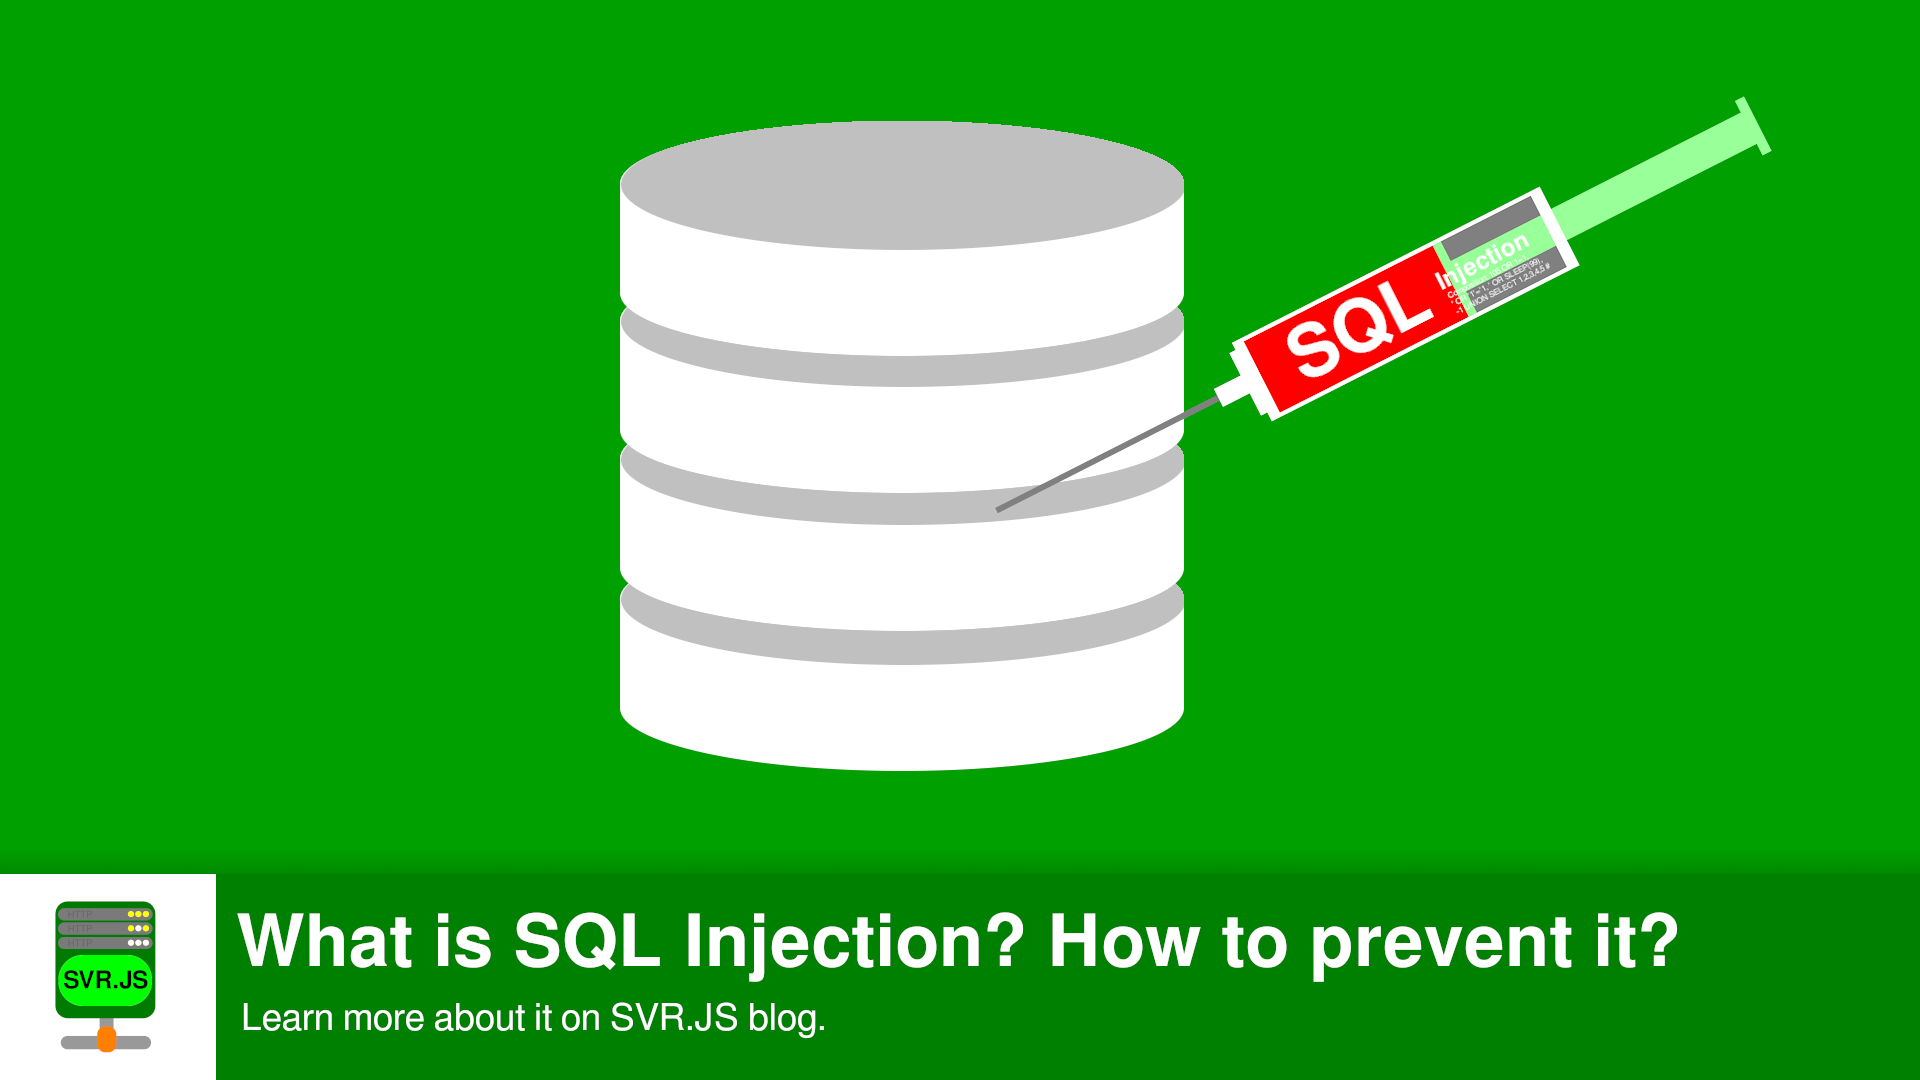 What is SQL injection? How to prevent it?